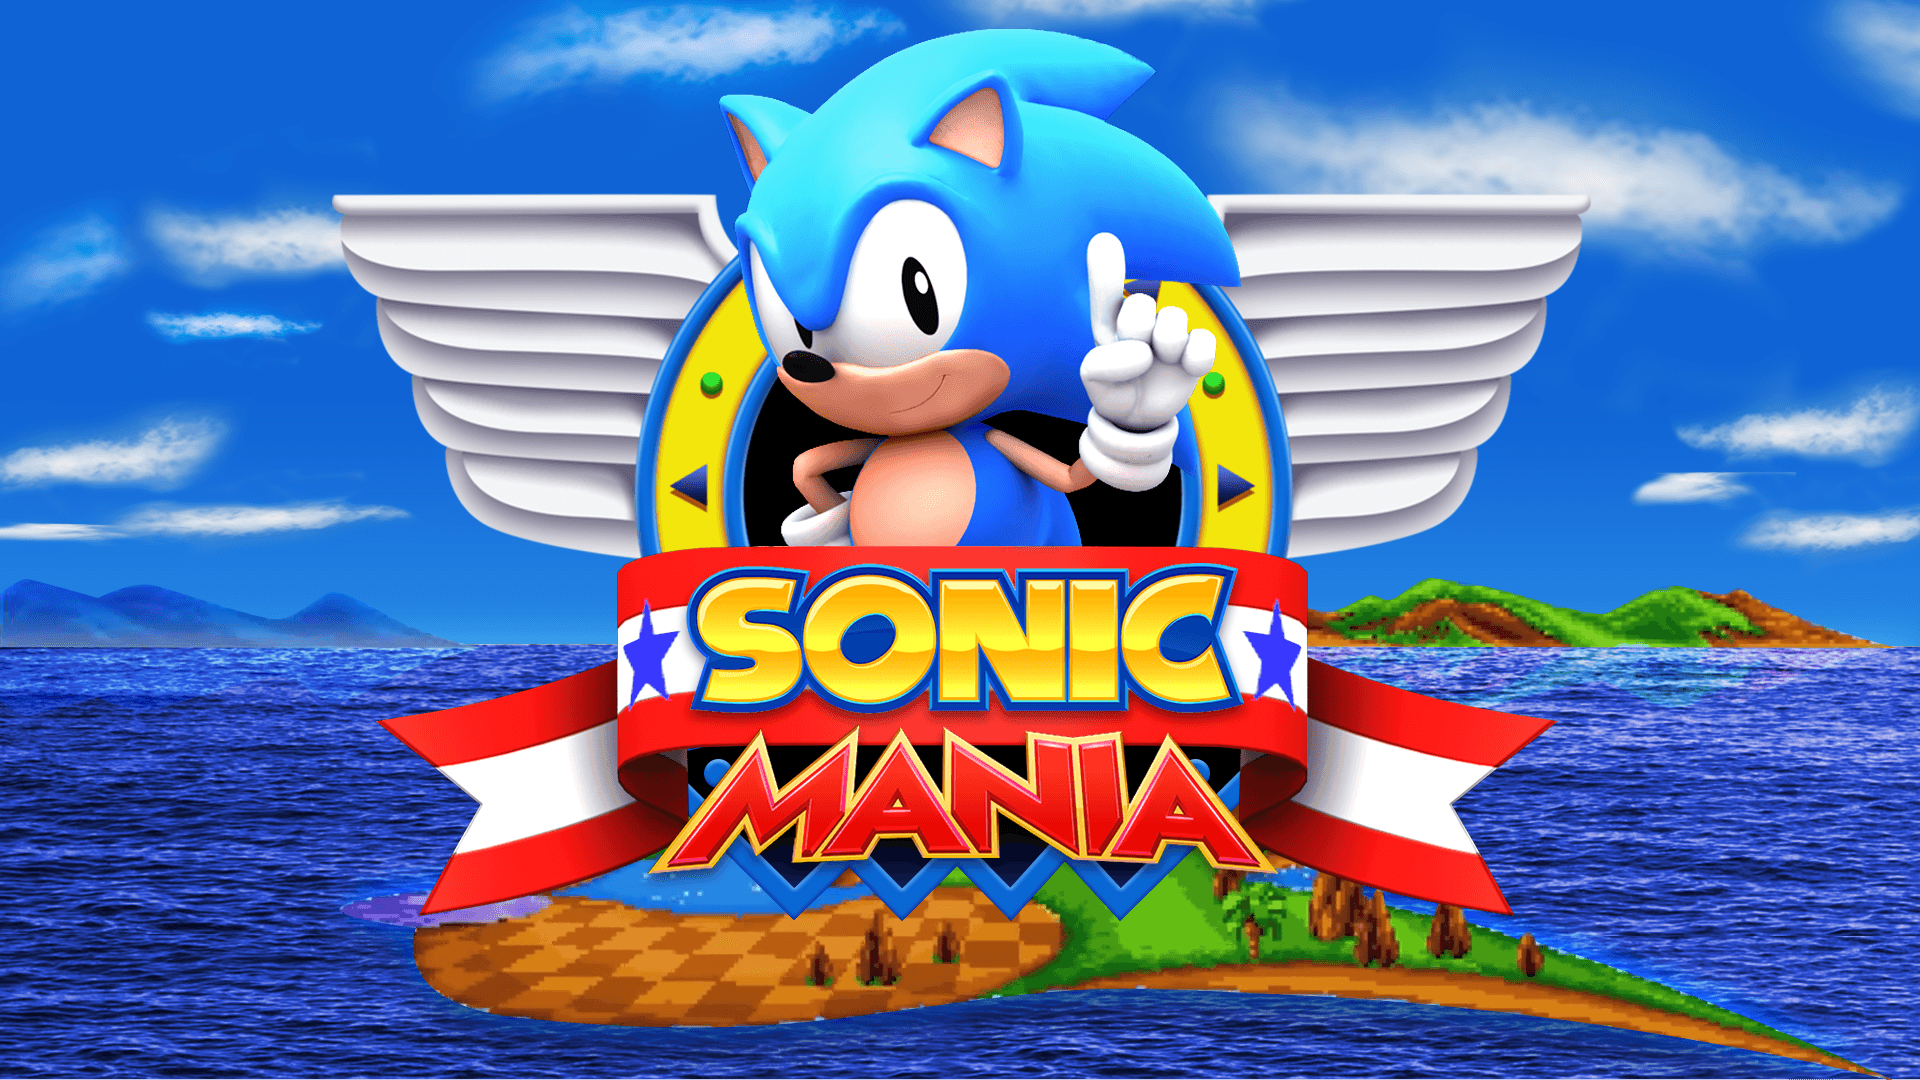 Sonic Mania Wallpapers - Wallpaper Cave